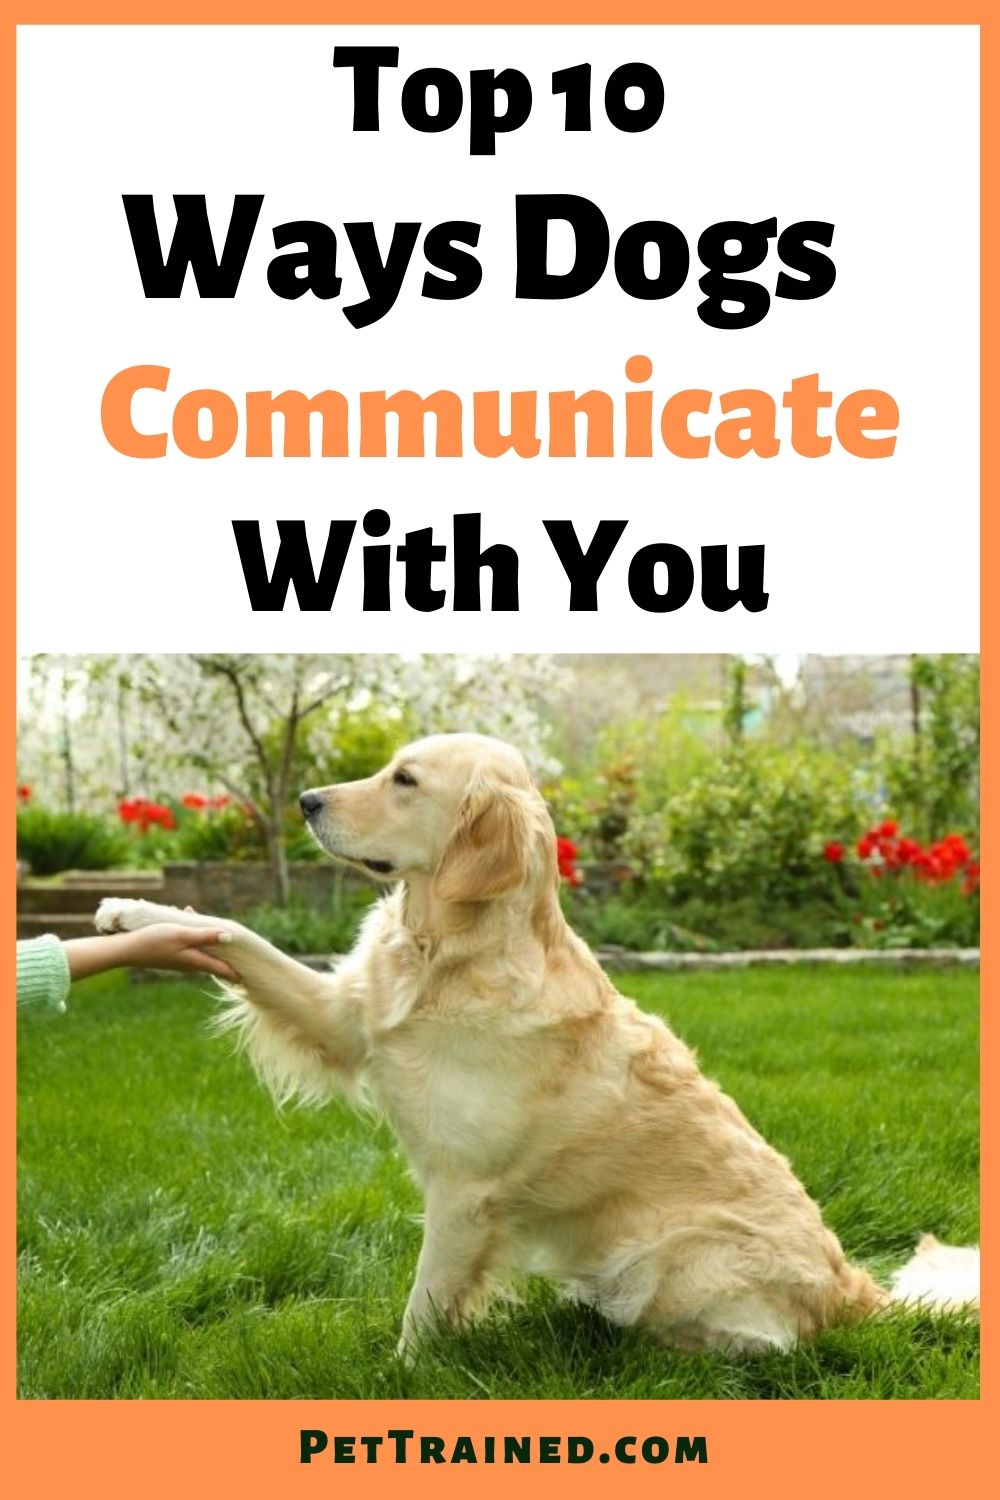 Top 10 ways dogs communicate with you